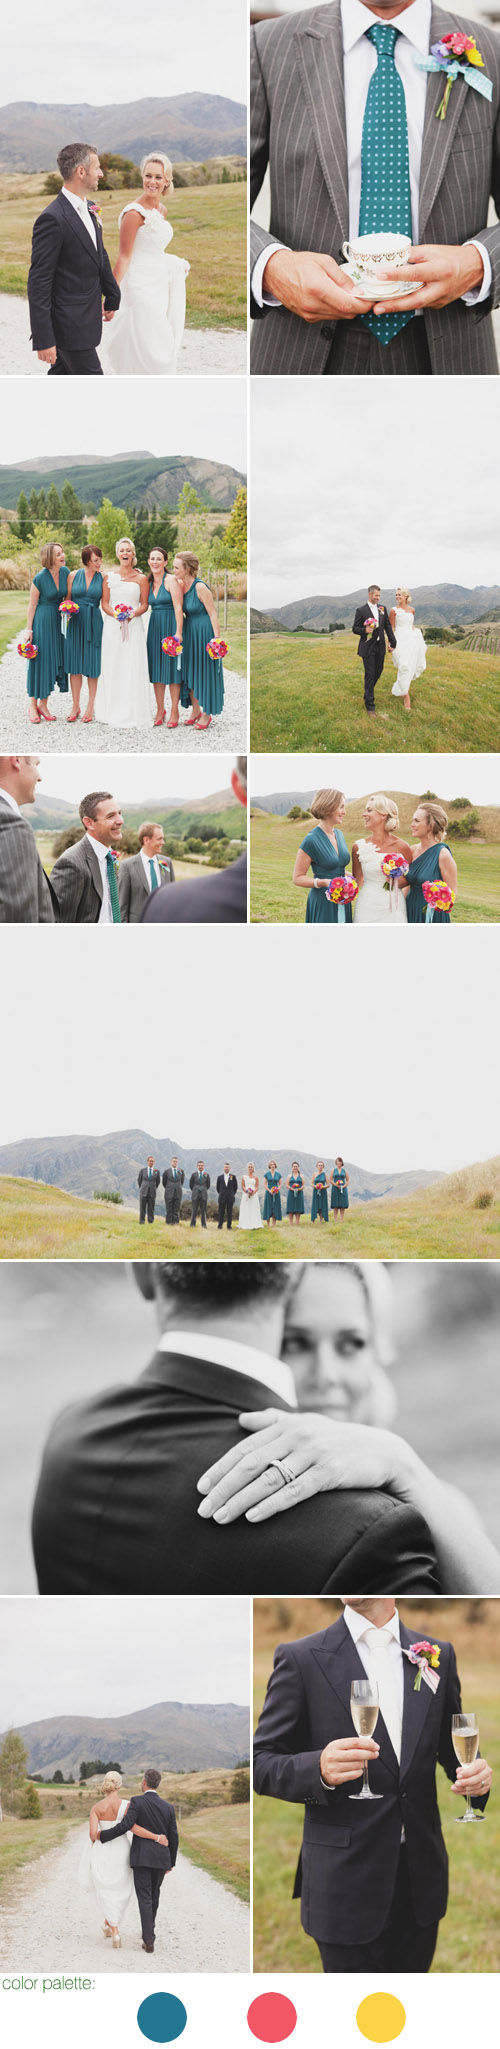 gorgeous colorful outside wedding at Mount Soho Winery, Queenstown, New Zealand photography by Kate MacPhereson